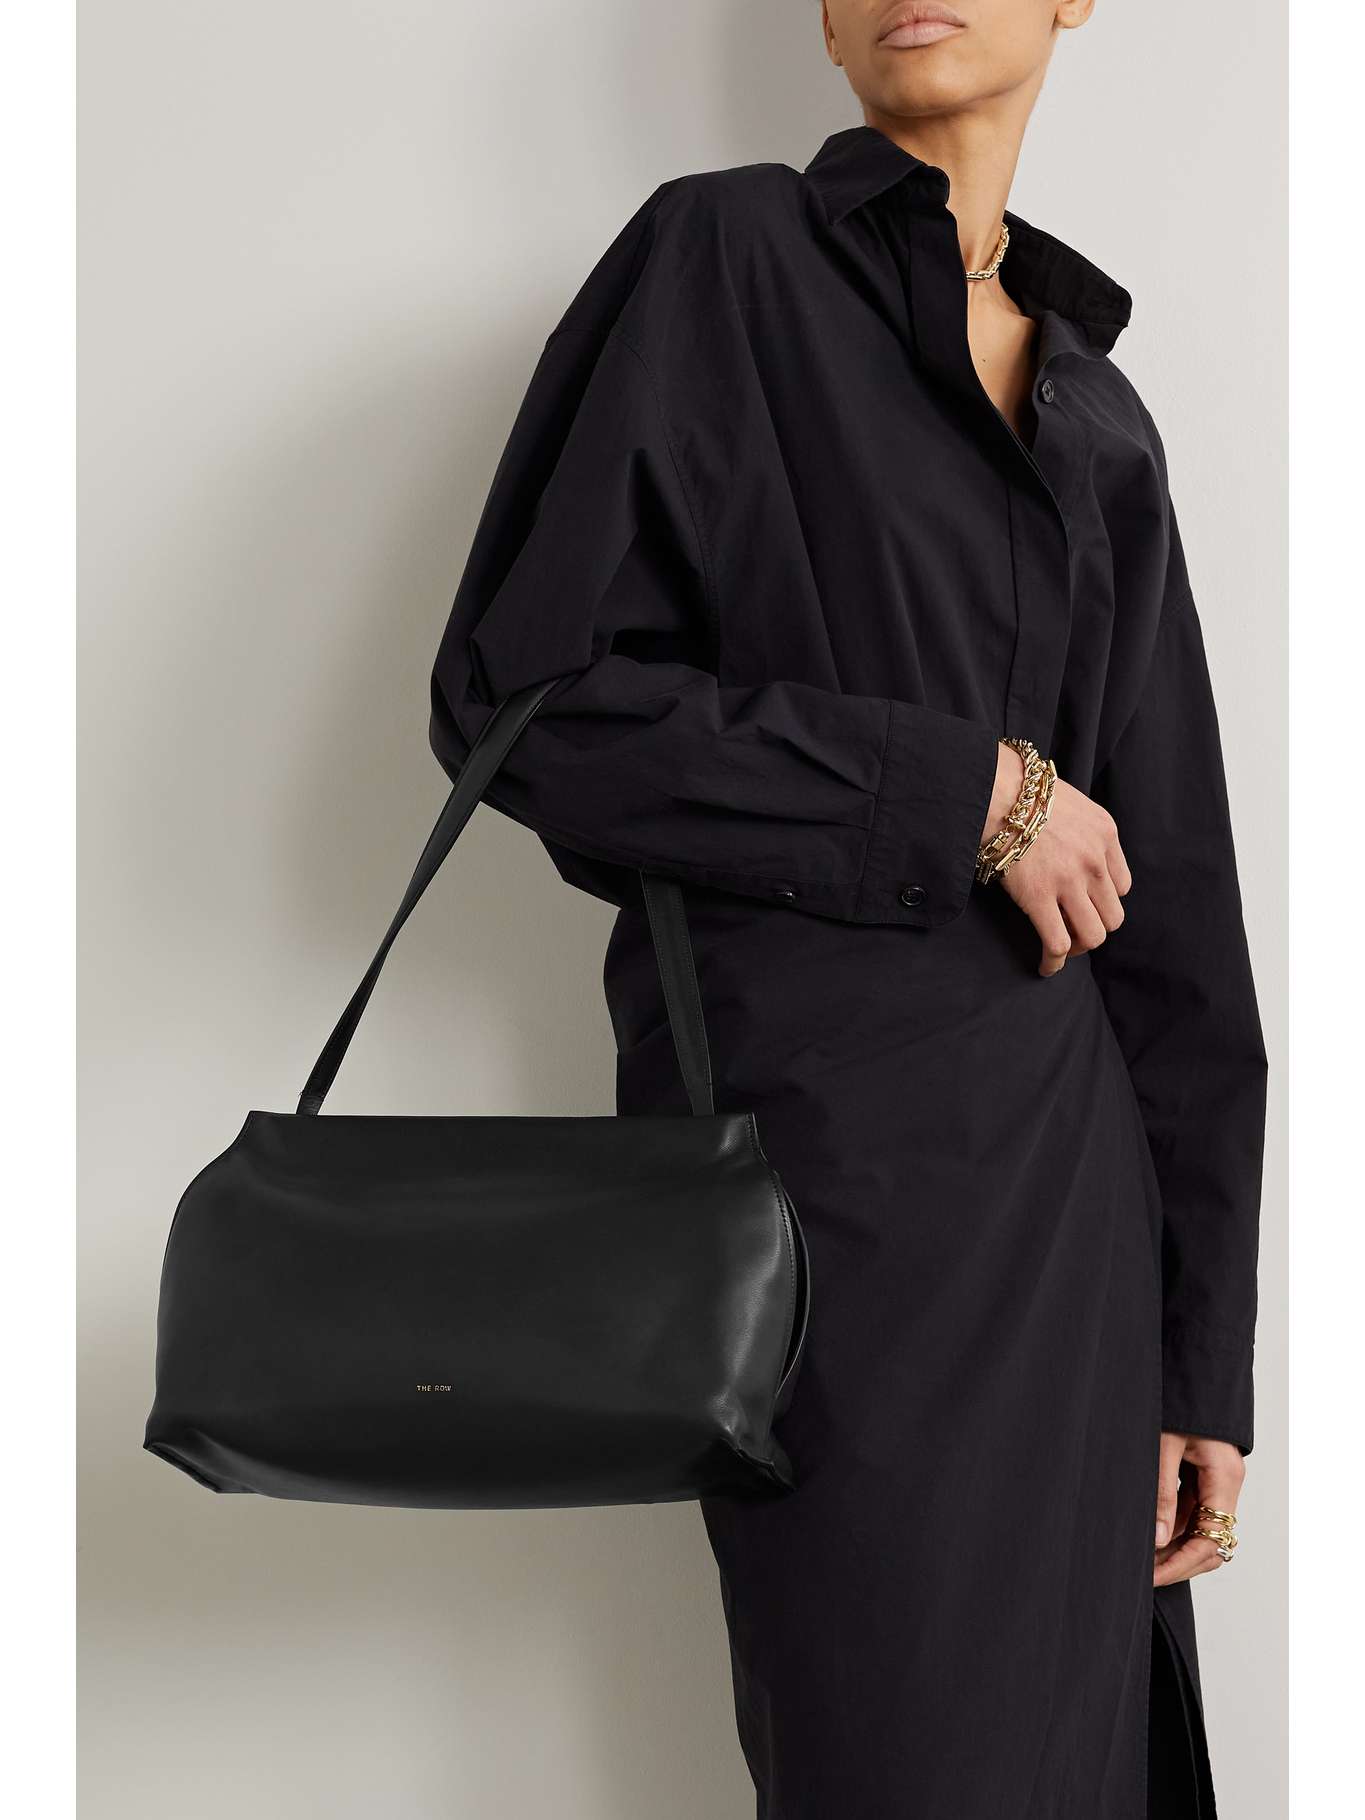 THE ROW Sienna leather tote